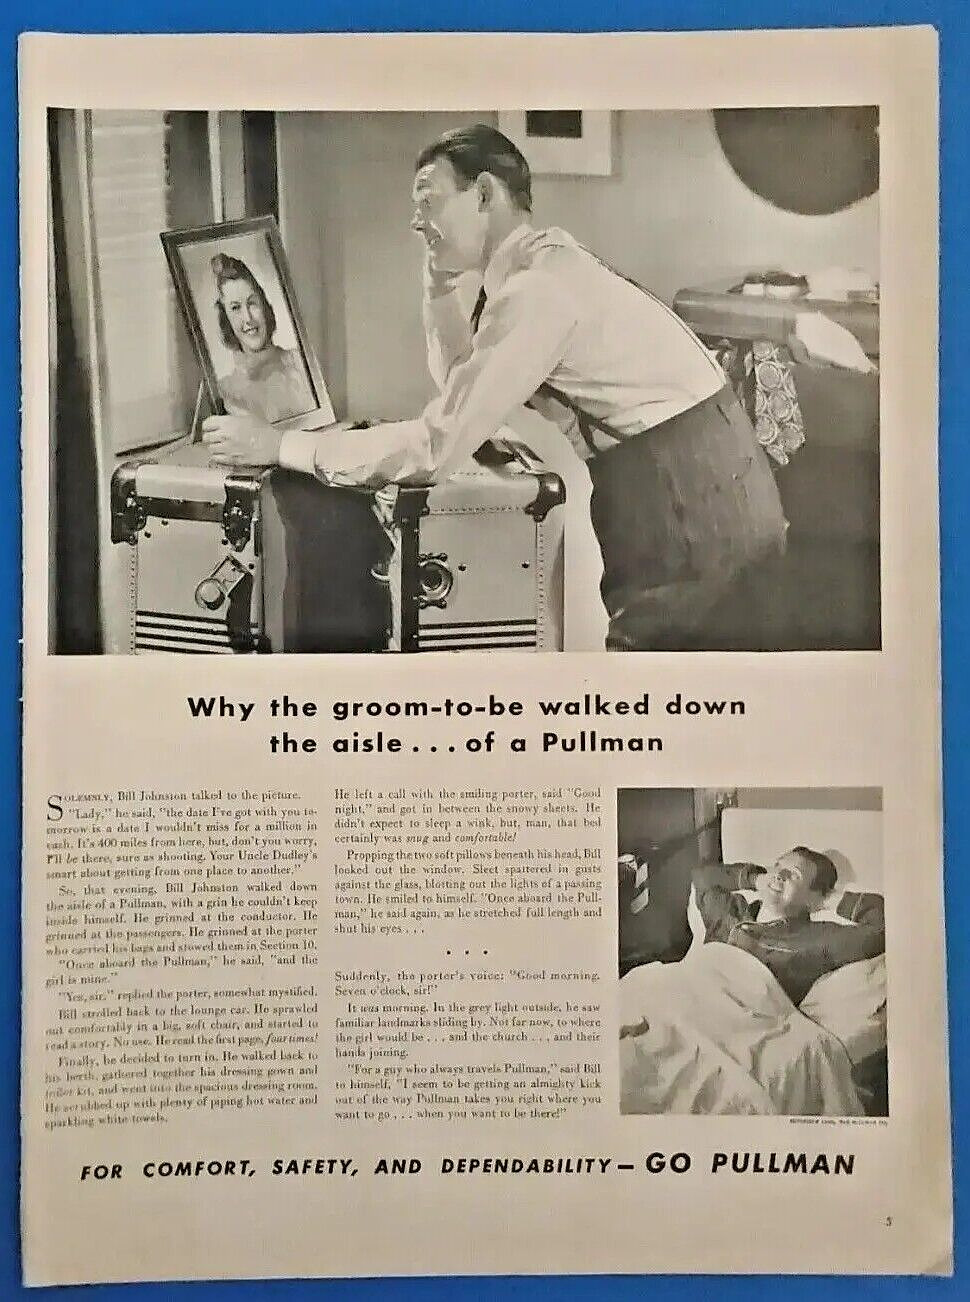 1942 Pullman Train Car Vtg 1940\'s Print Ad Why the groom-to-be walked down...